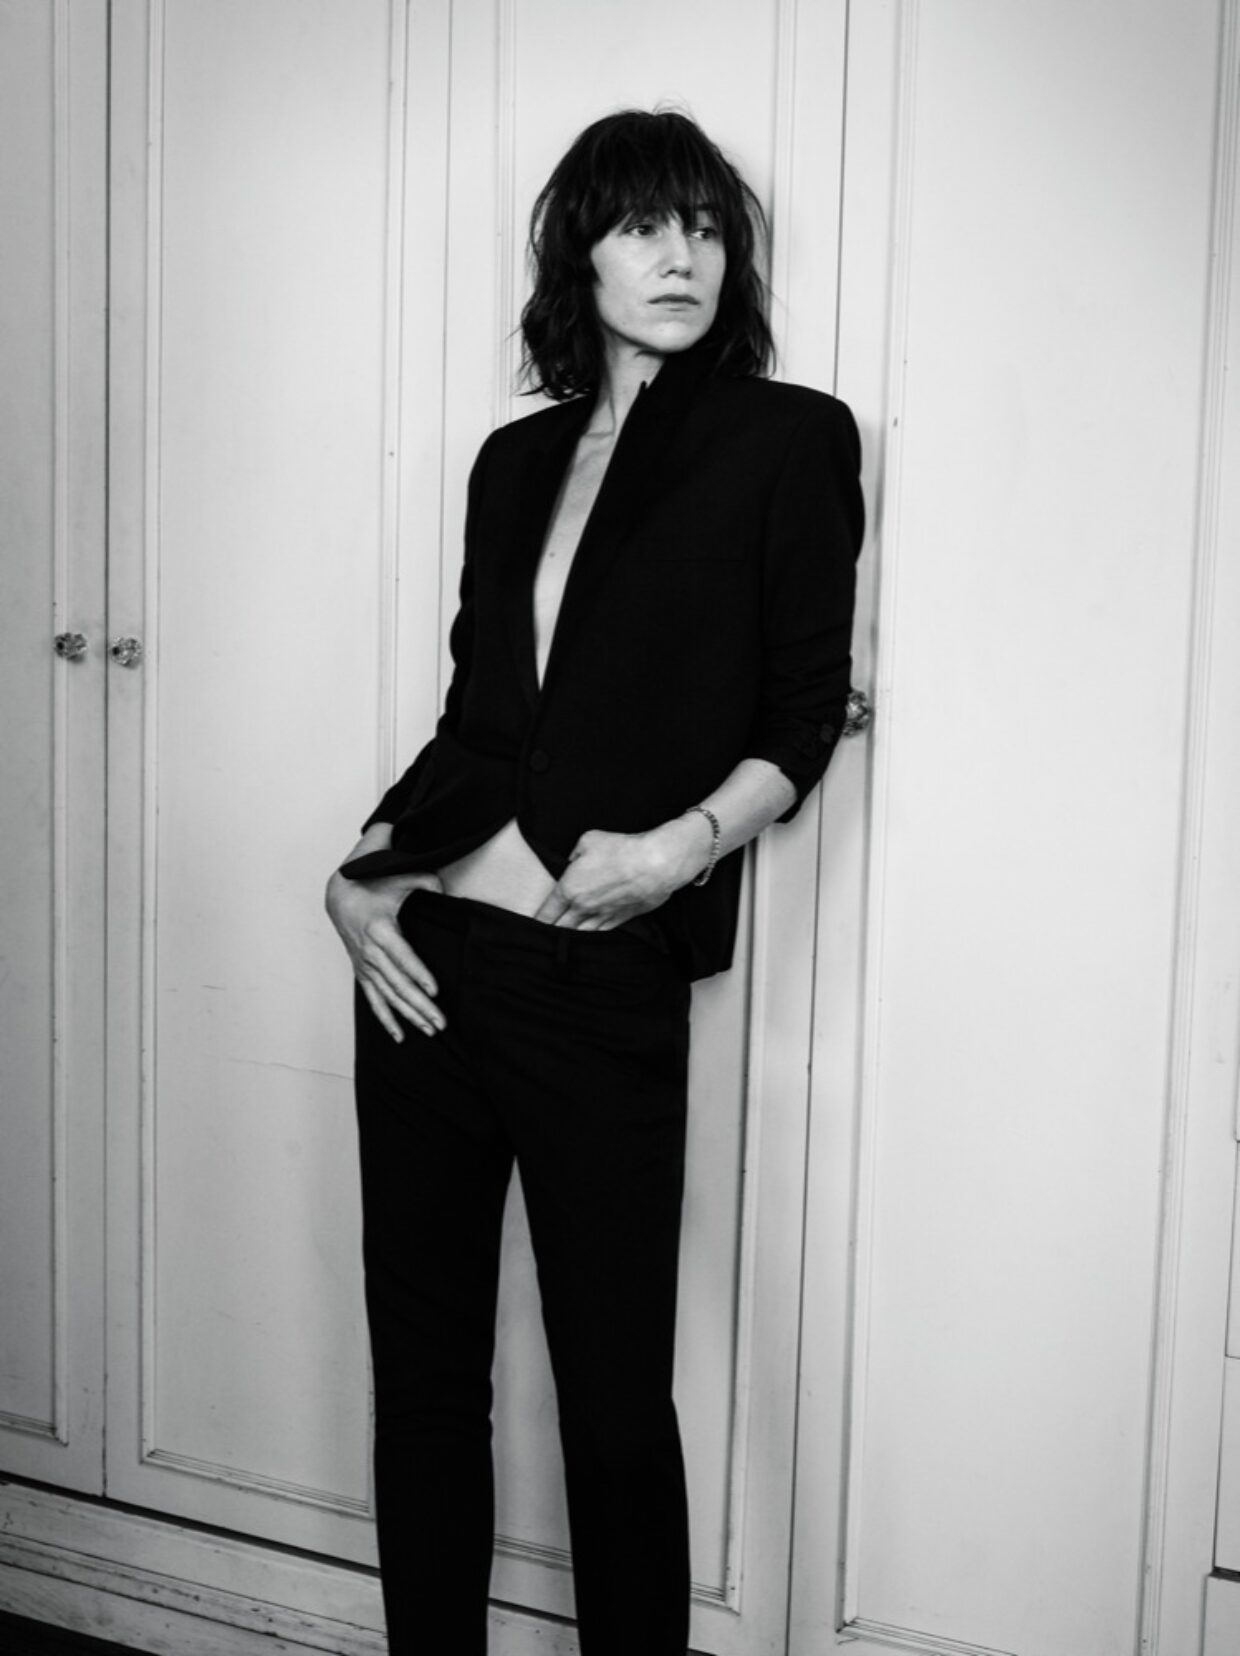 Charlotte Gainsbourg Covers Interview Magazine in the “Queens of Cool” Issue | 4